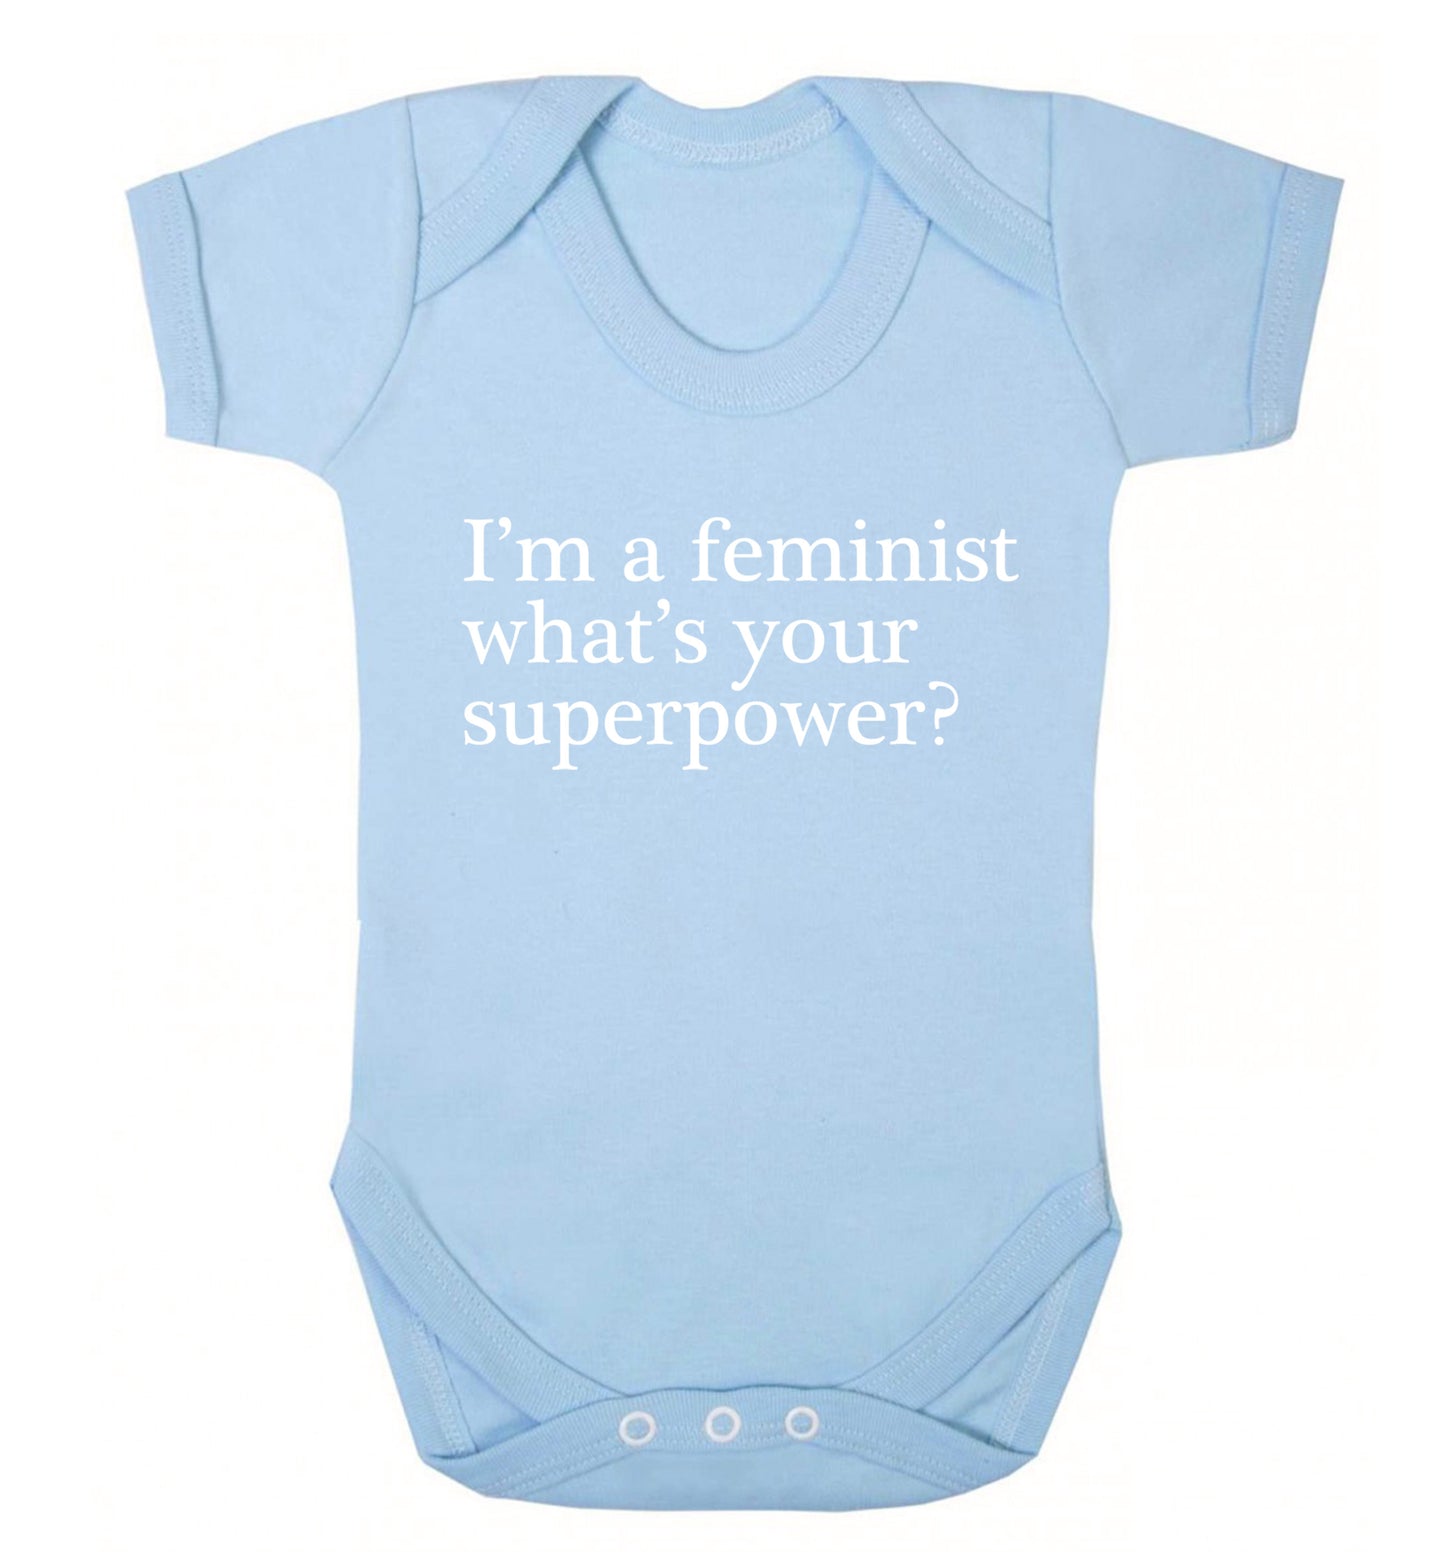 I'm a feminist what's your superpower? Baby Vest pale blue 18-24 months